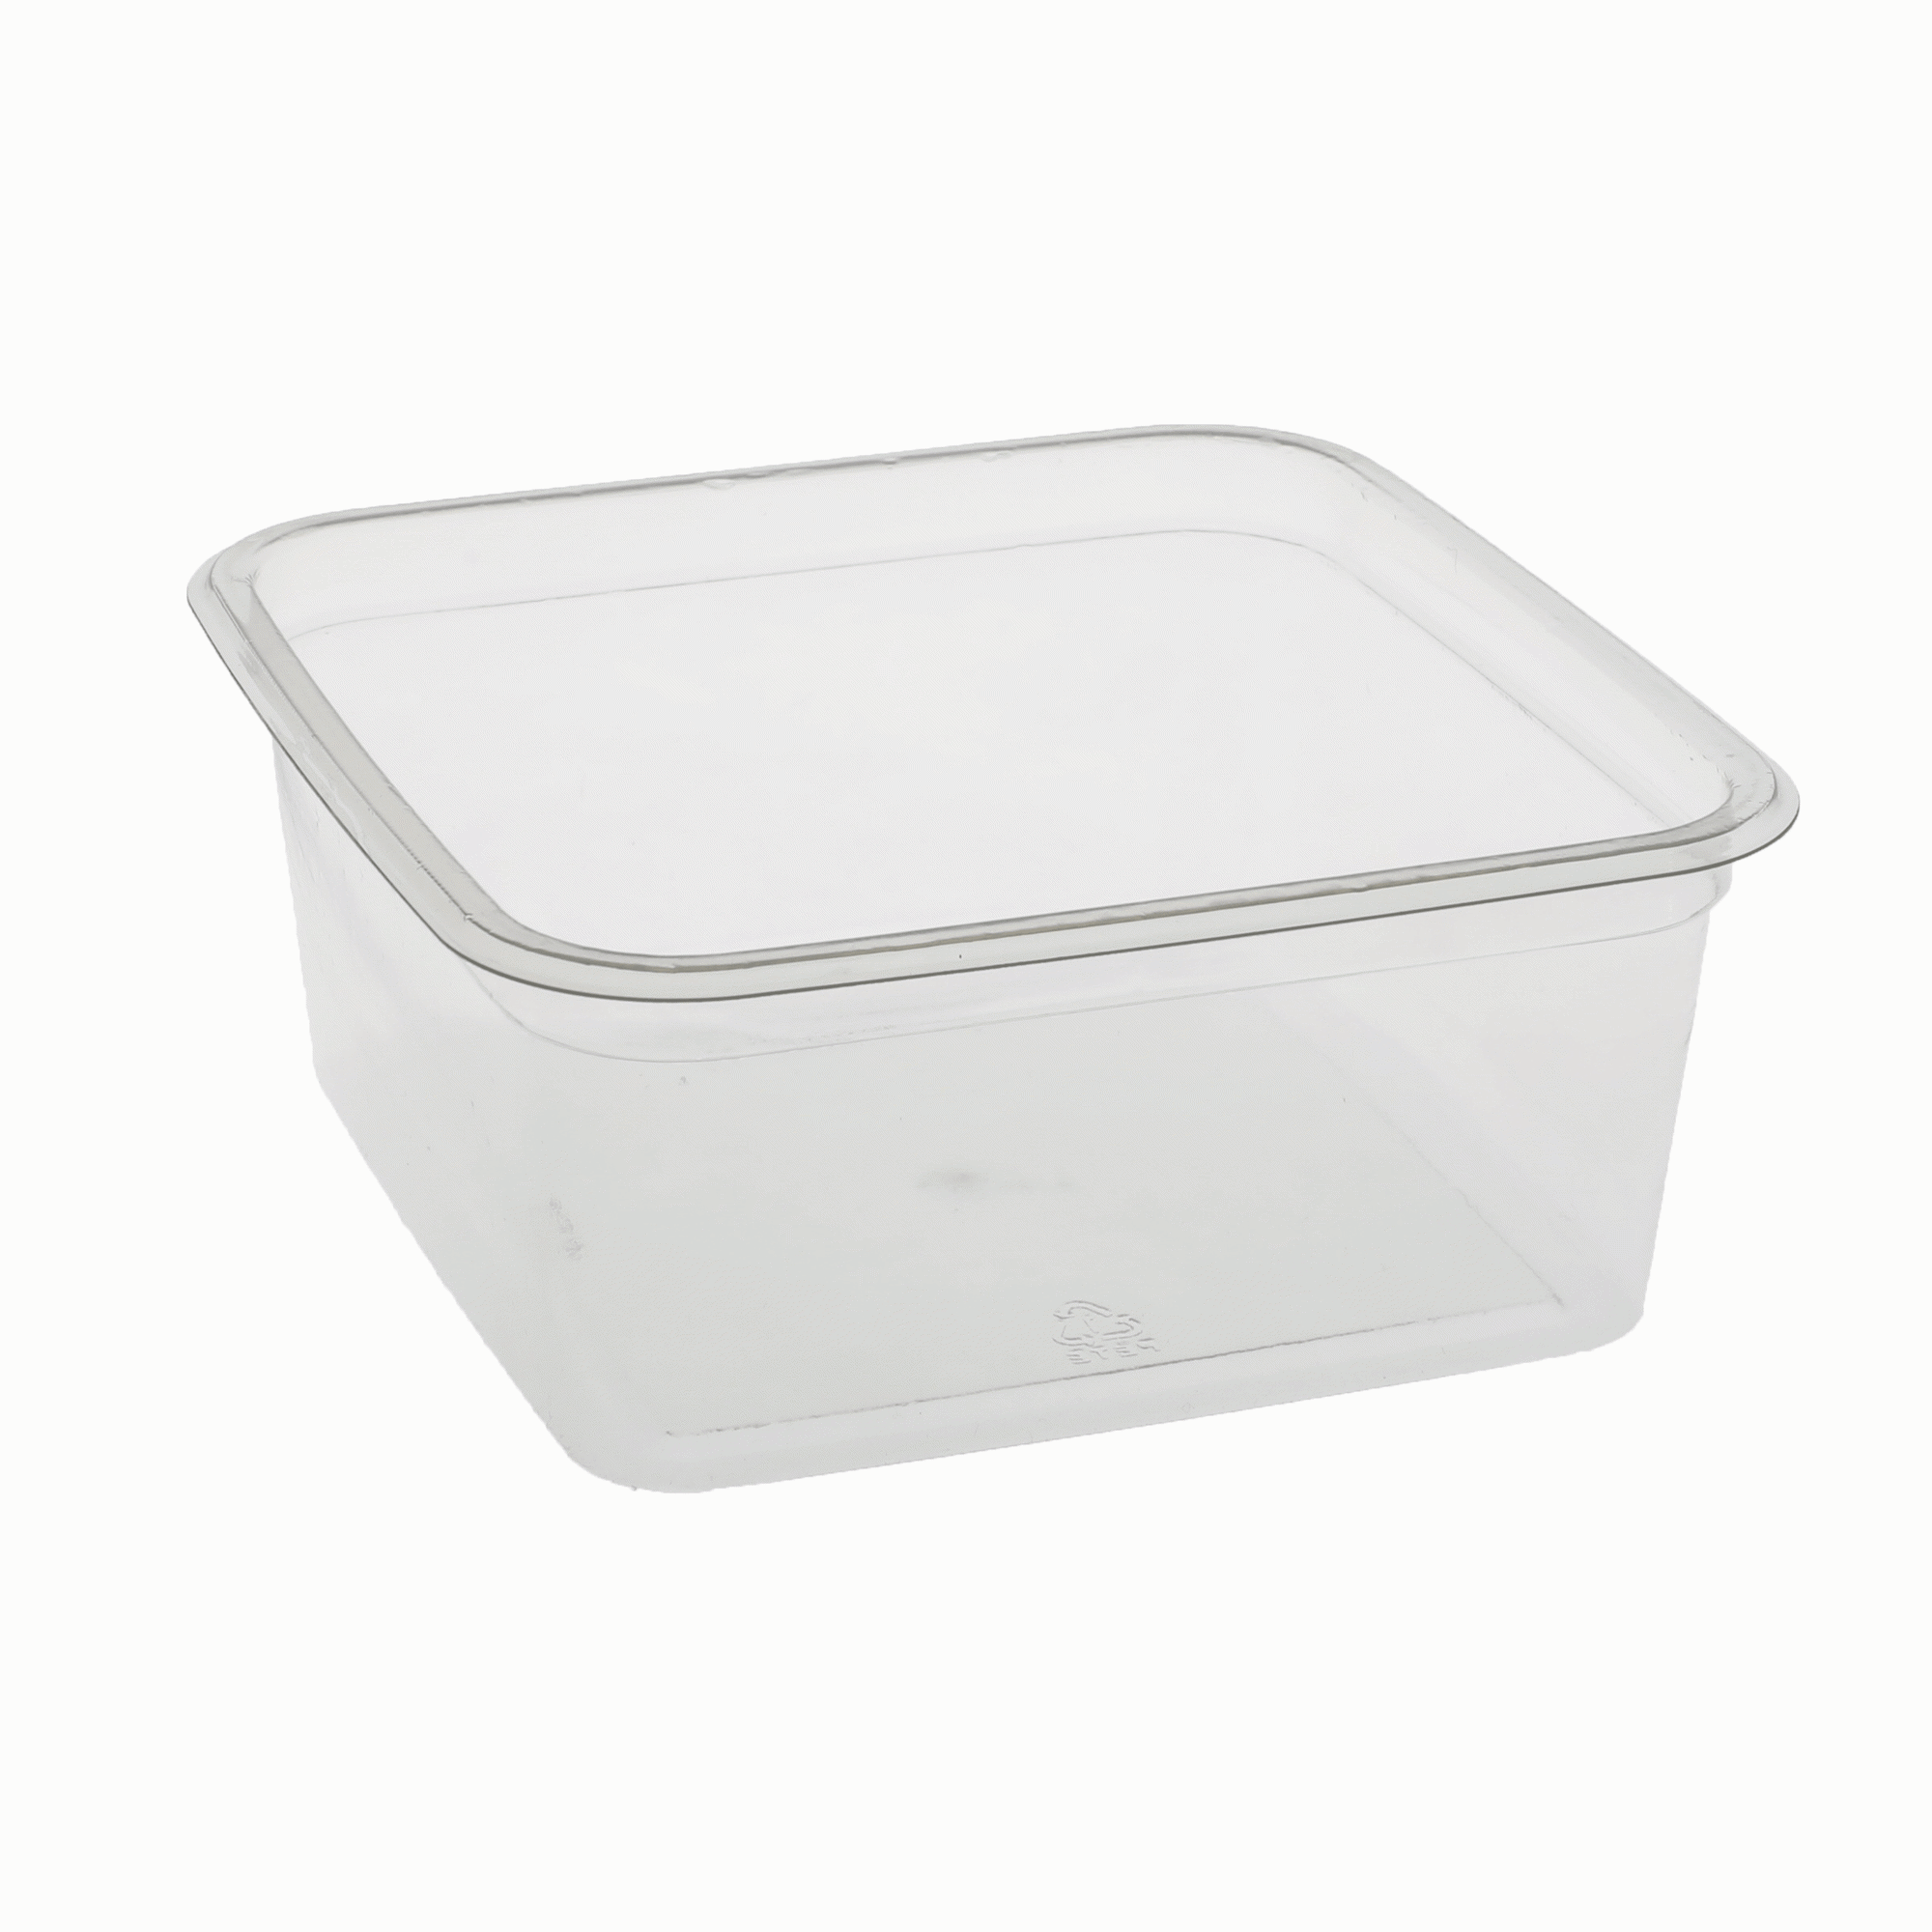 Pactiv YY4S32 4 Inch 32 oz Square Tamper Resistant Clear Plastic